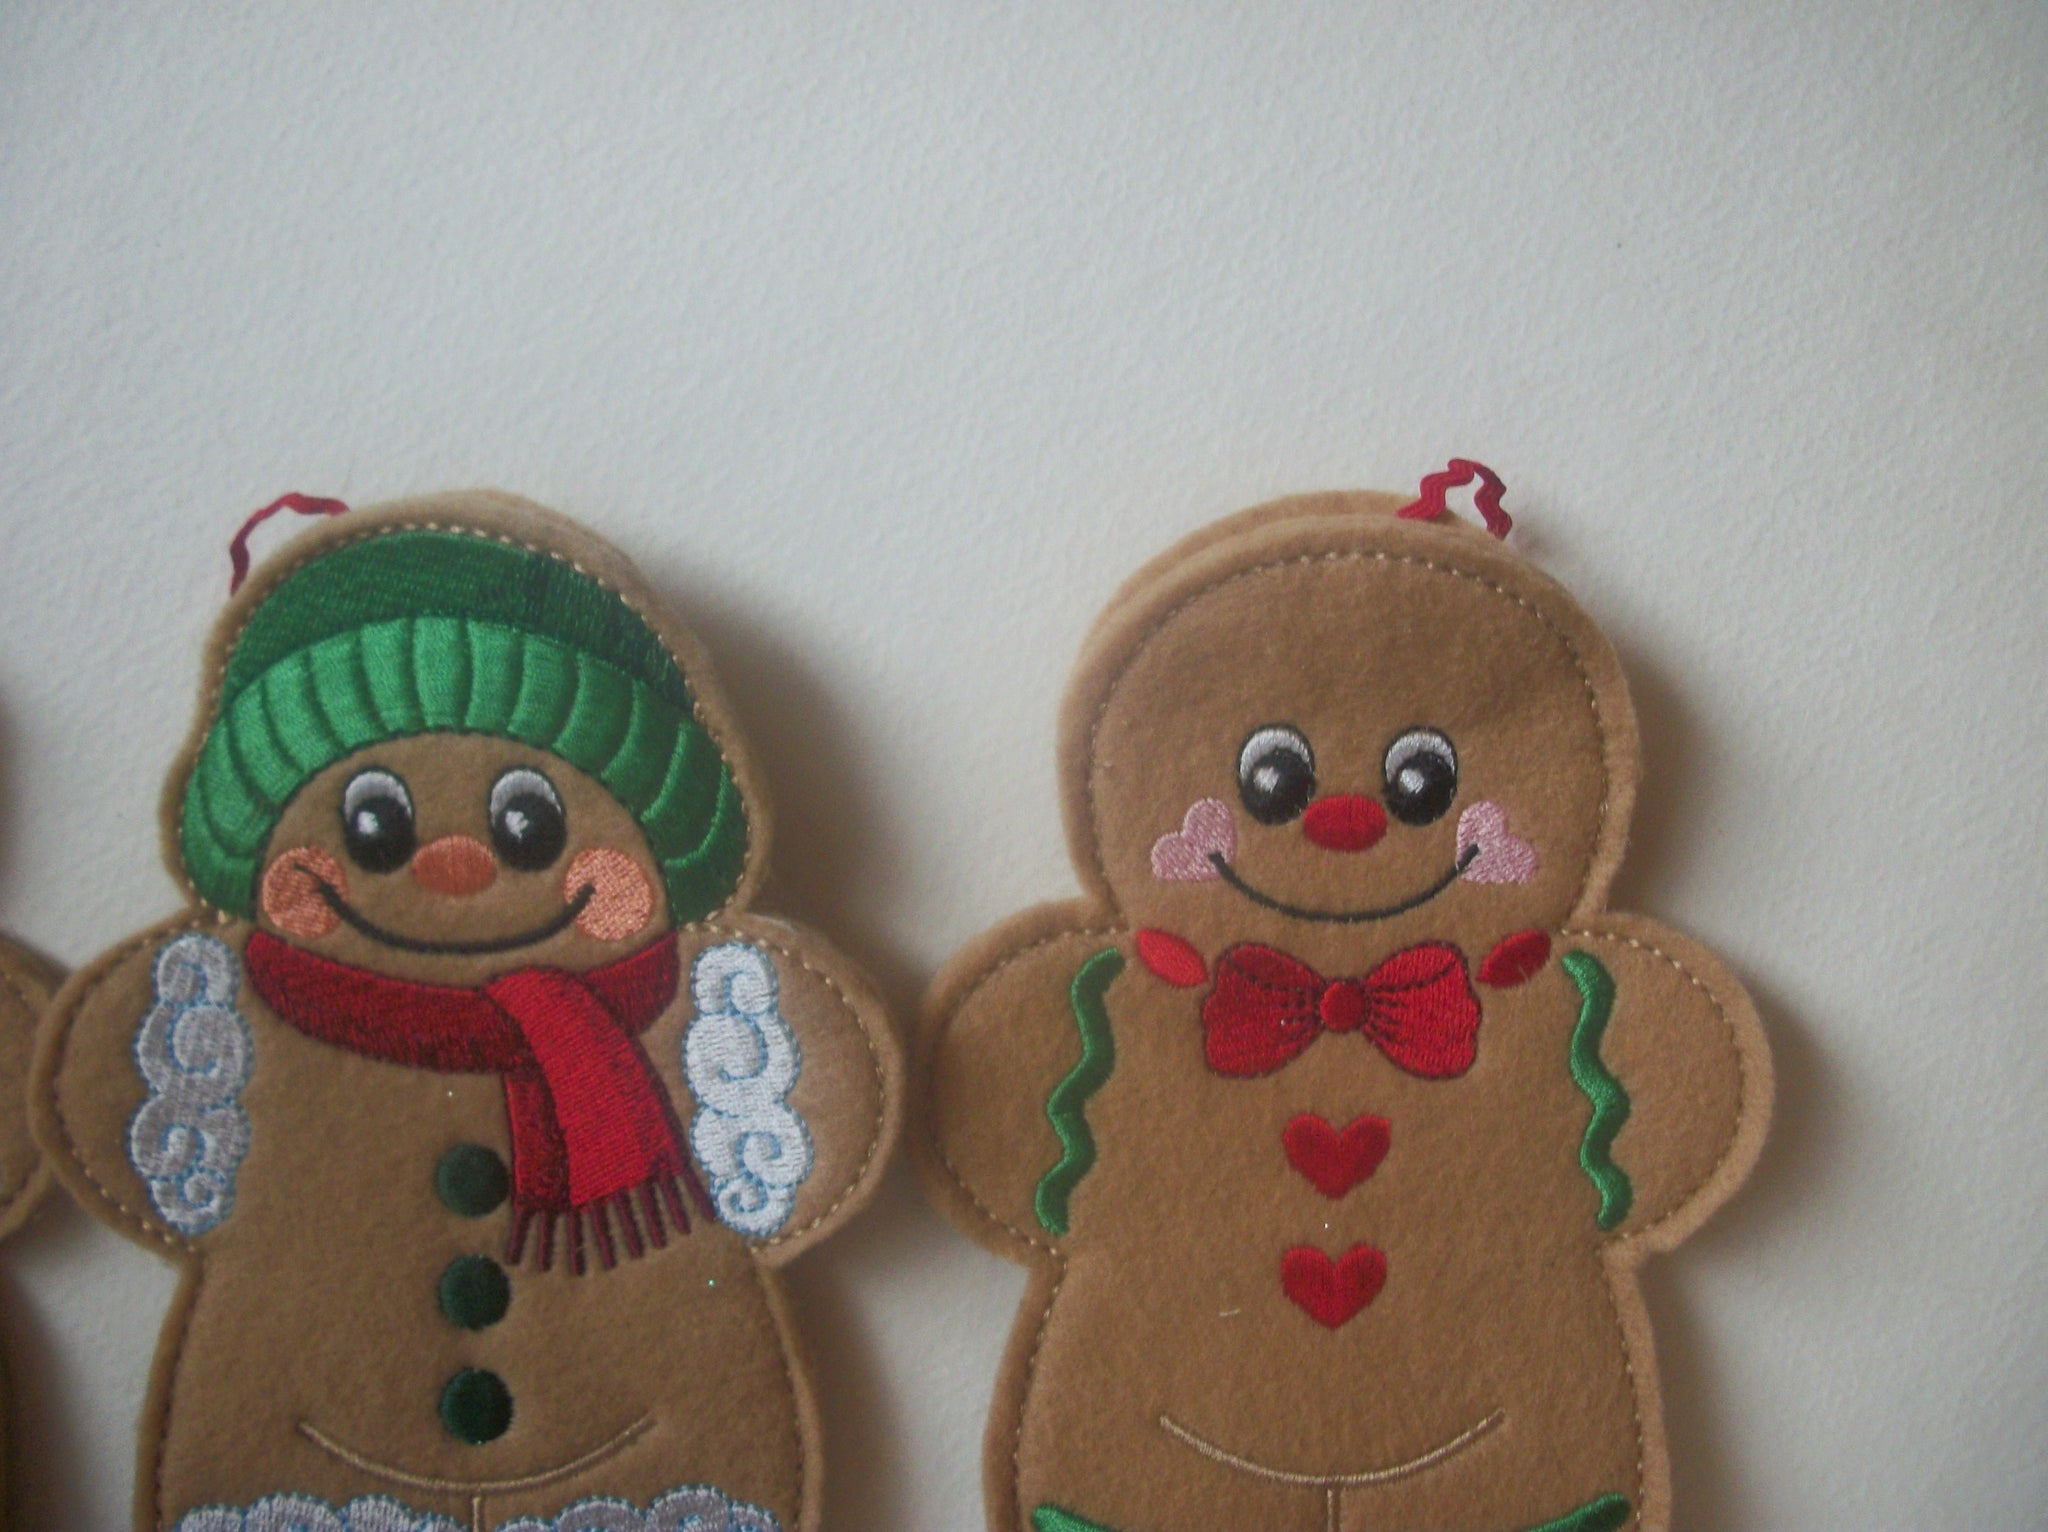 Set of 6 Christmas Ornaments Stocking Stuffers Vintage Hand Made